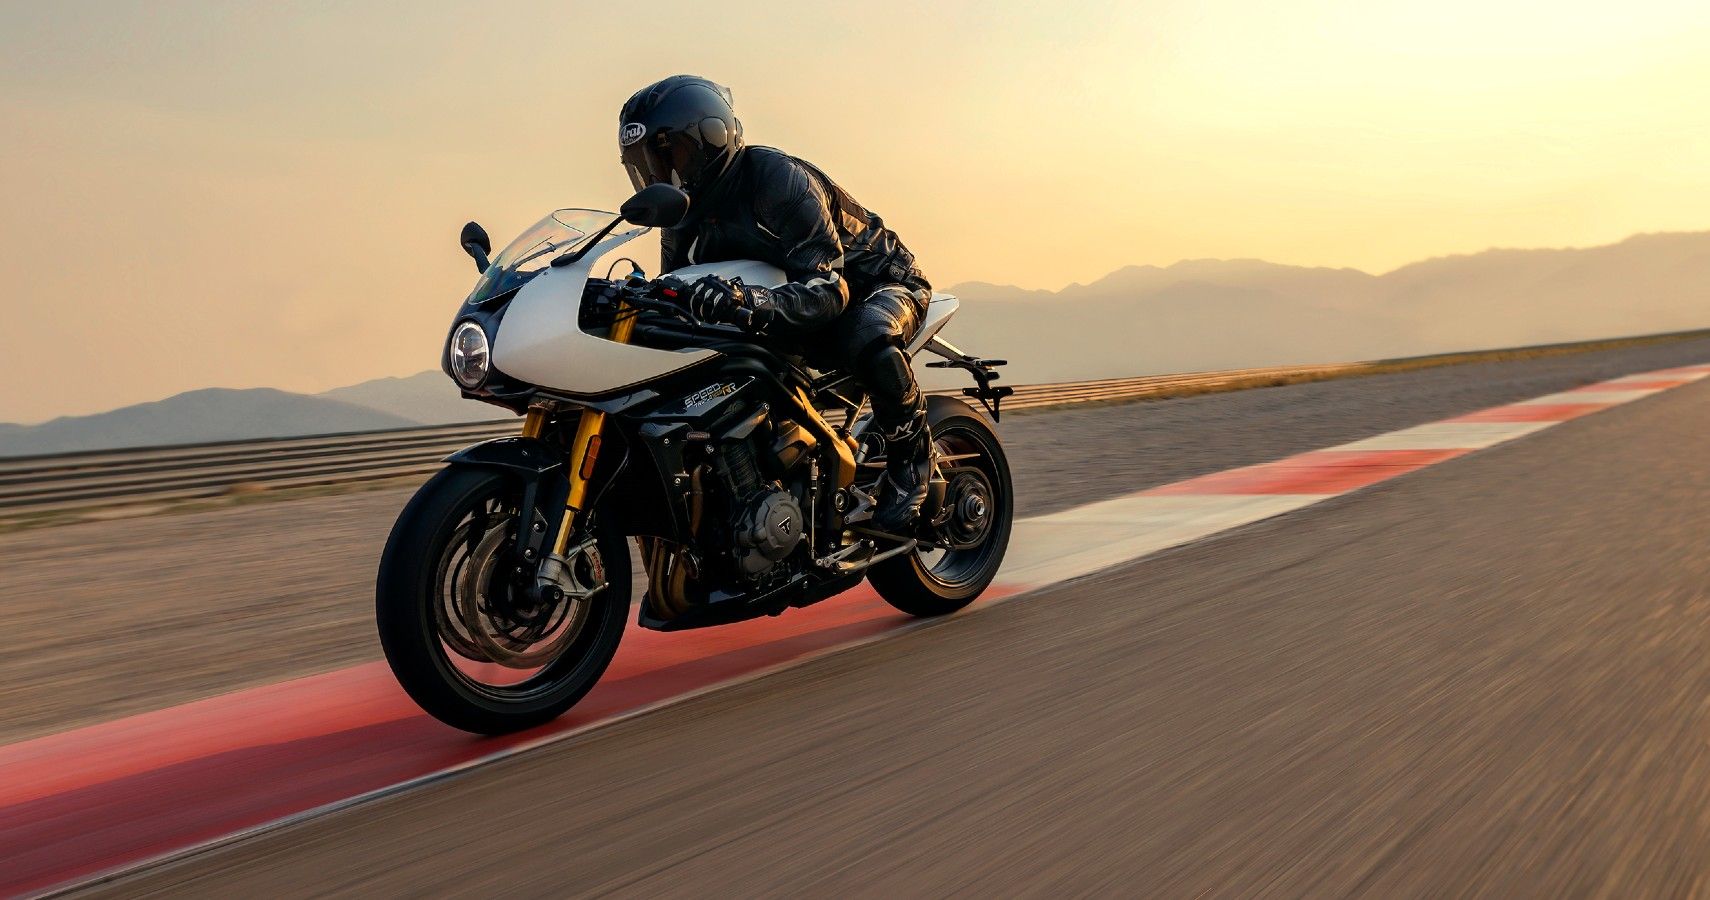 10 Things Every Motorcycle Enthusiast Should Know About The 2022 Triumph Speed Triple 1200 RR